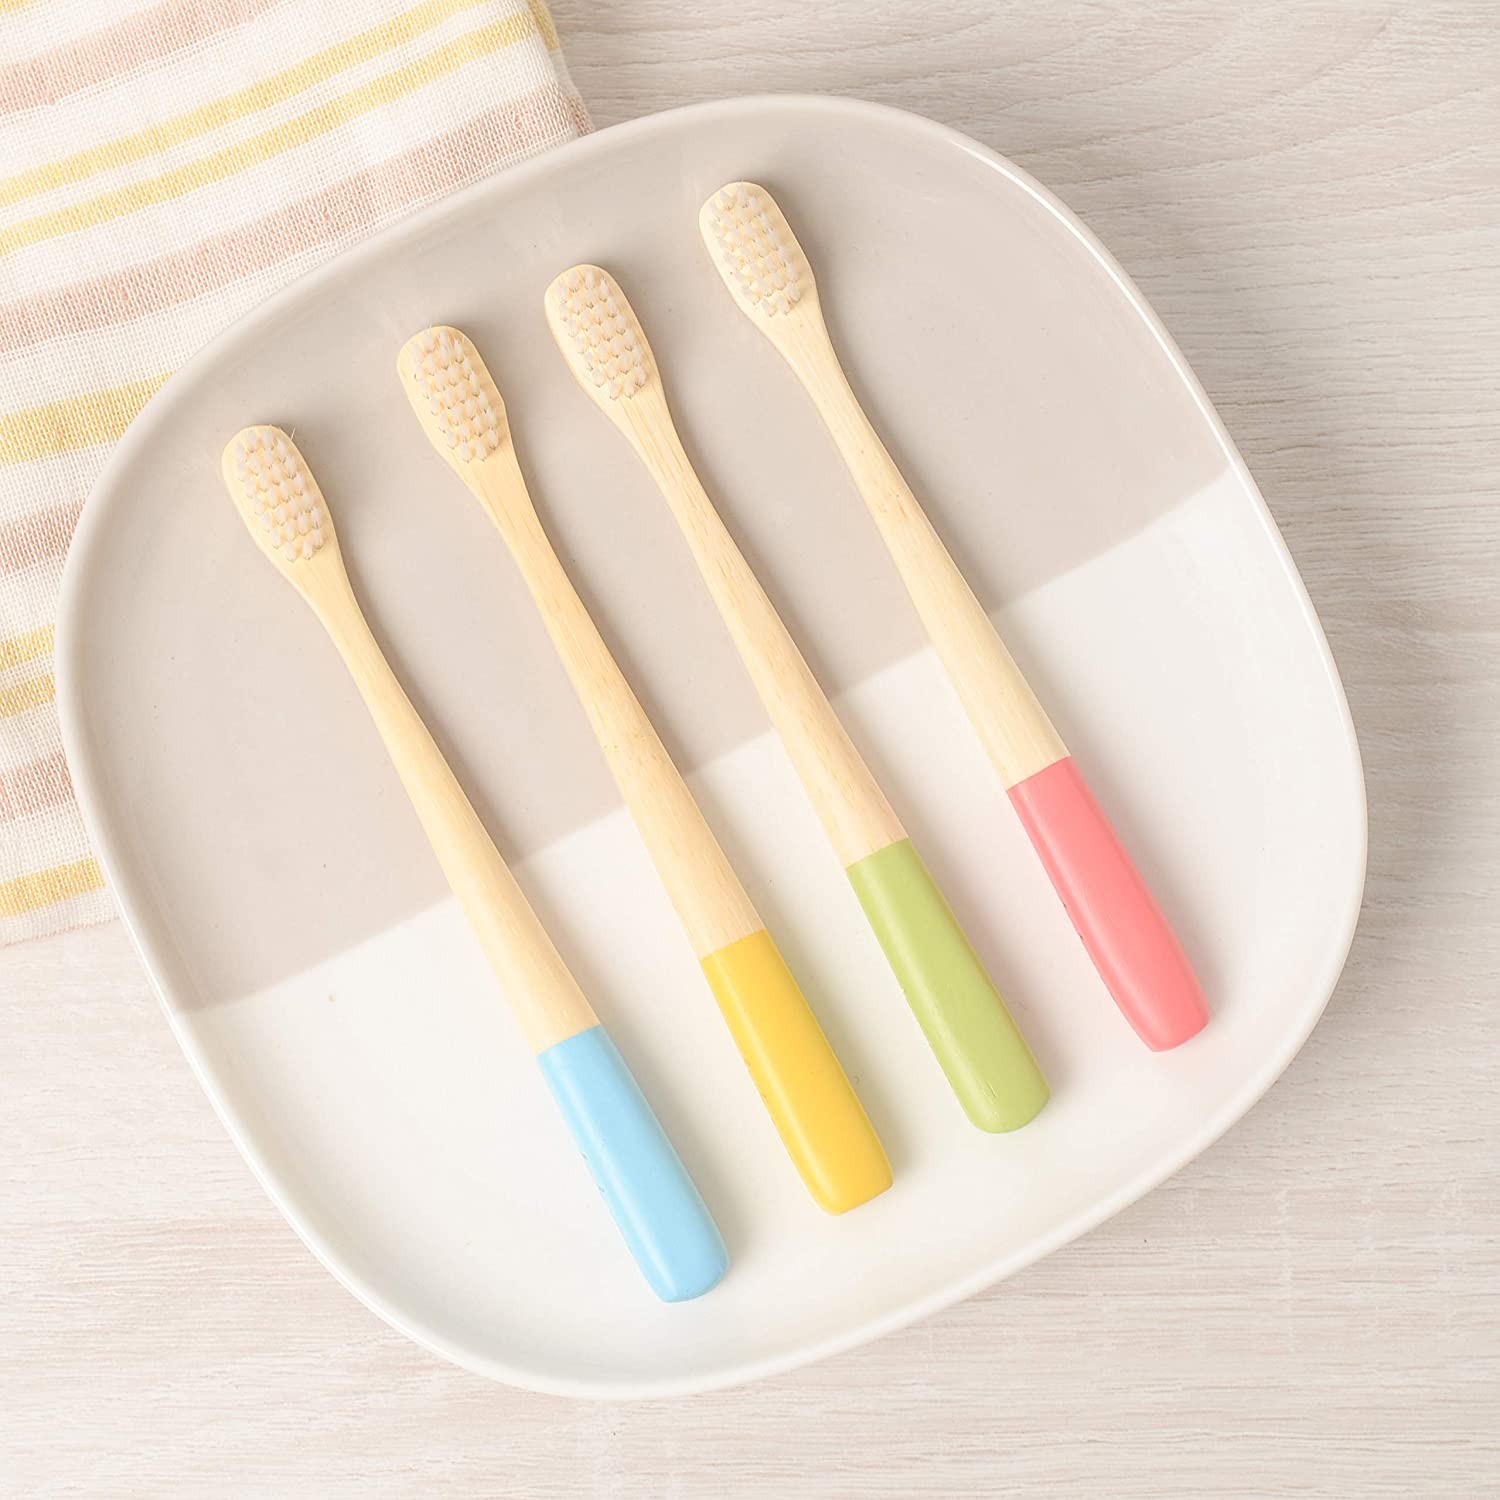 Hot sale Biodegradable Toothbrush Bristles - Compostable Zero Waste Organic Bamboo Toothbrushes With Soft Bristles For Children – CHYM